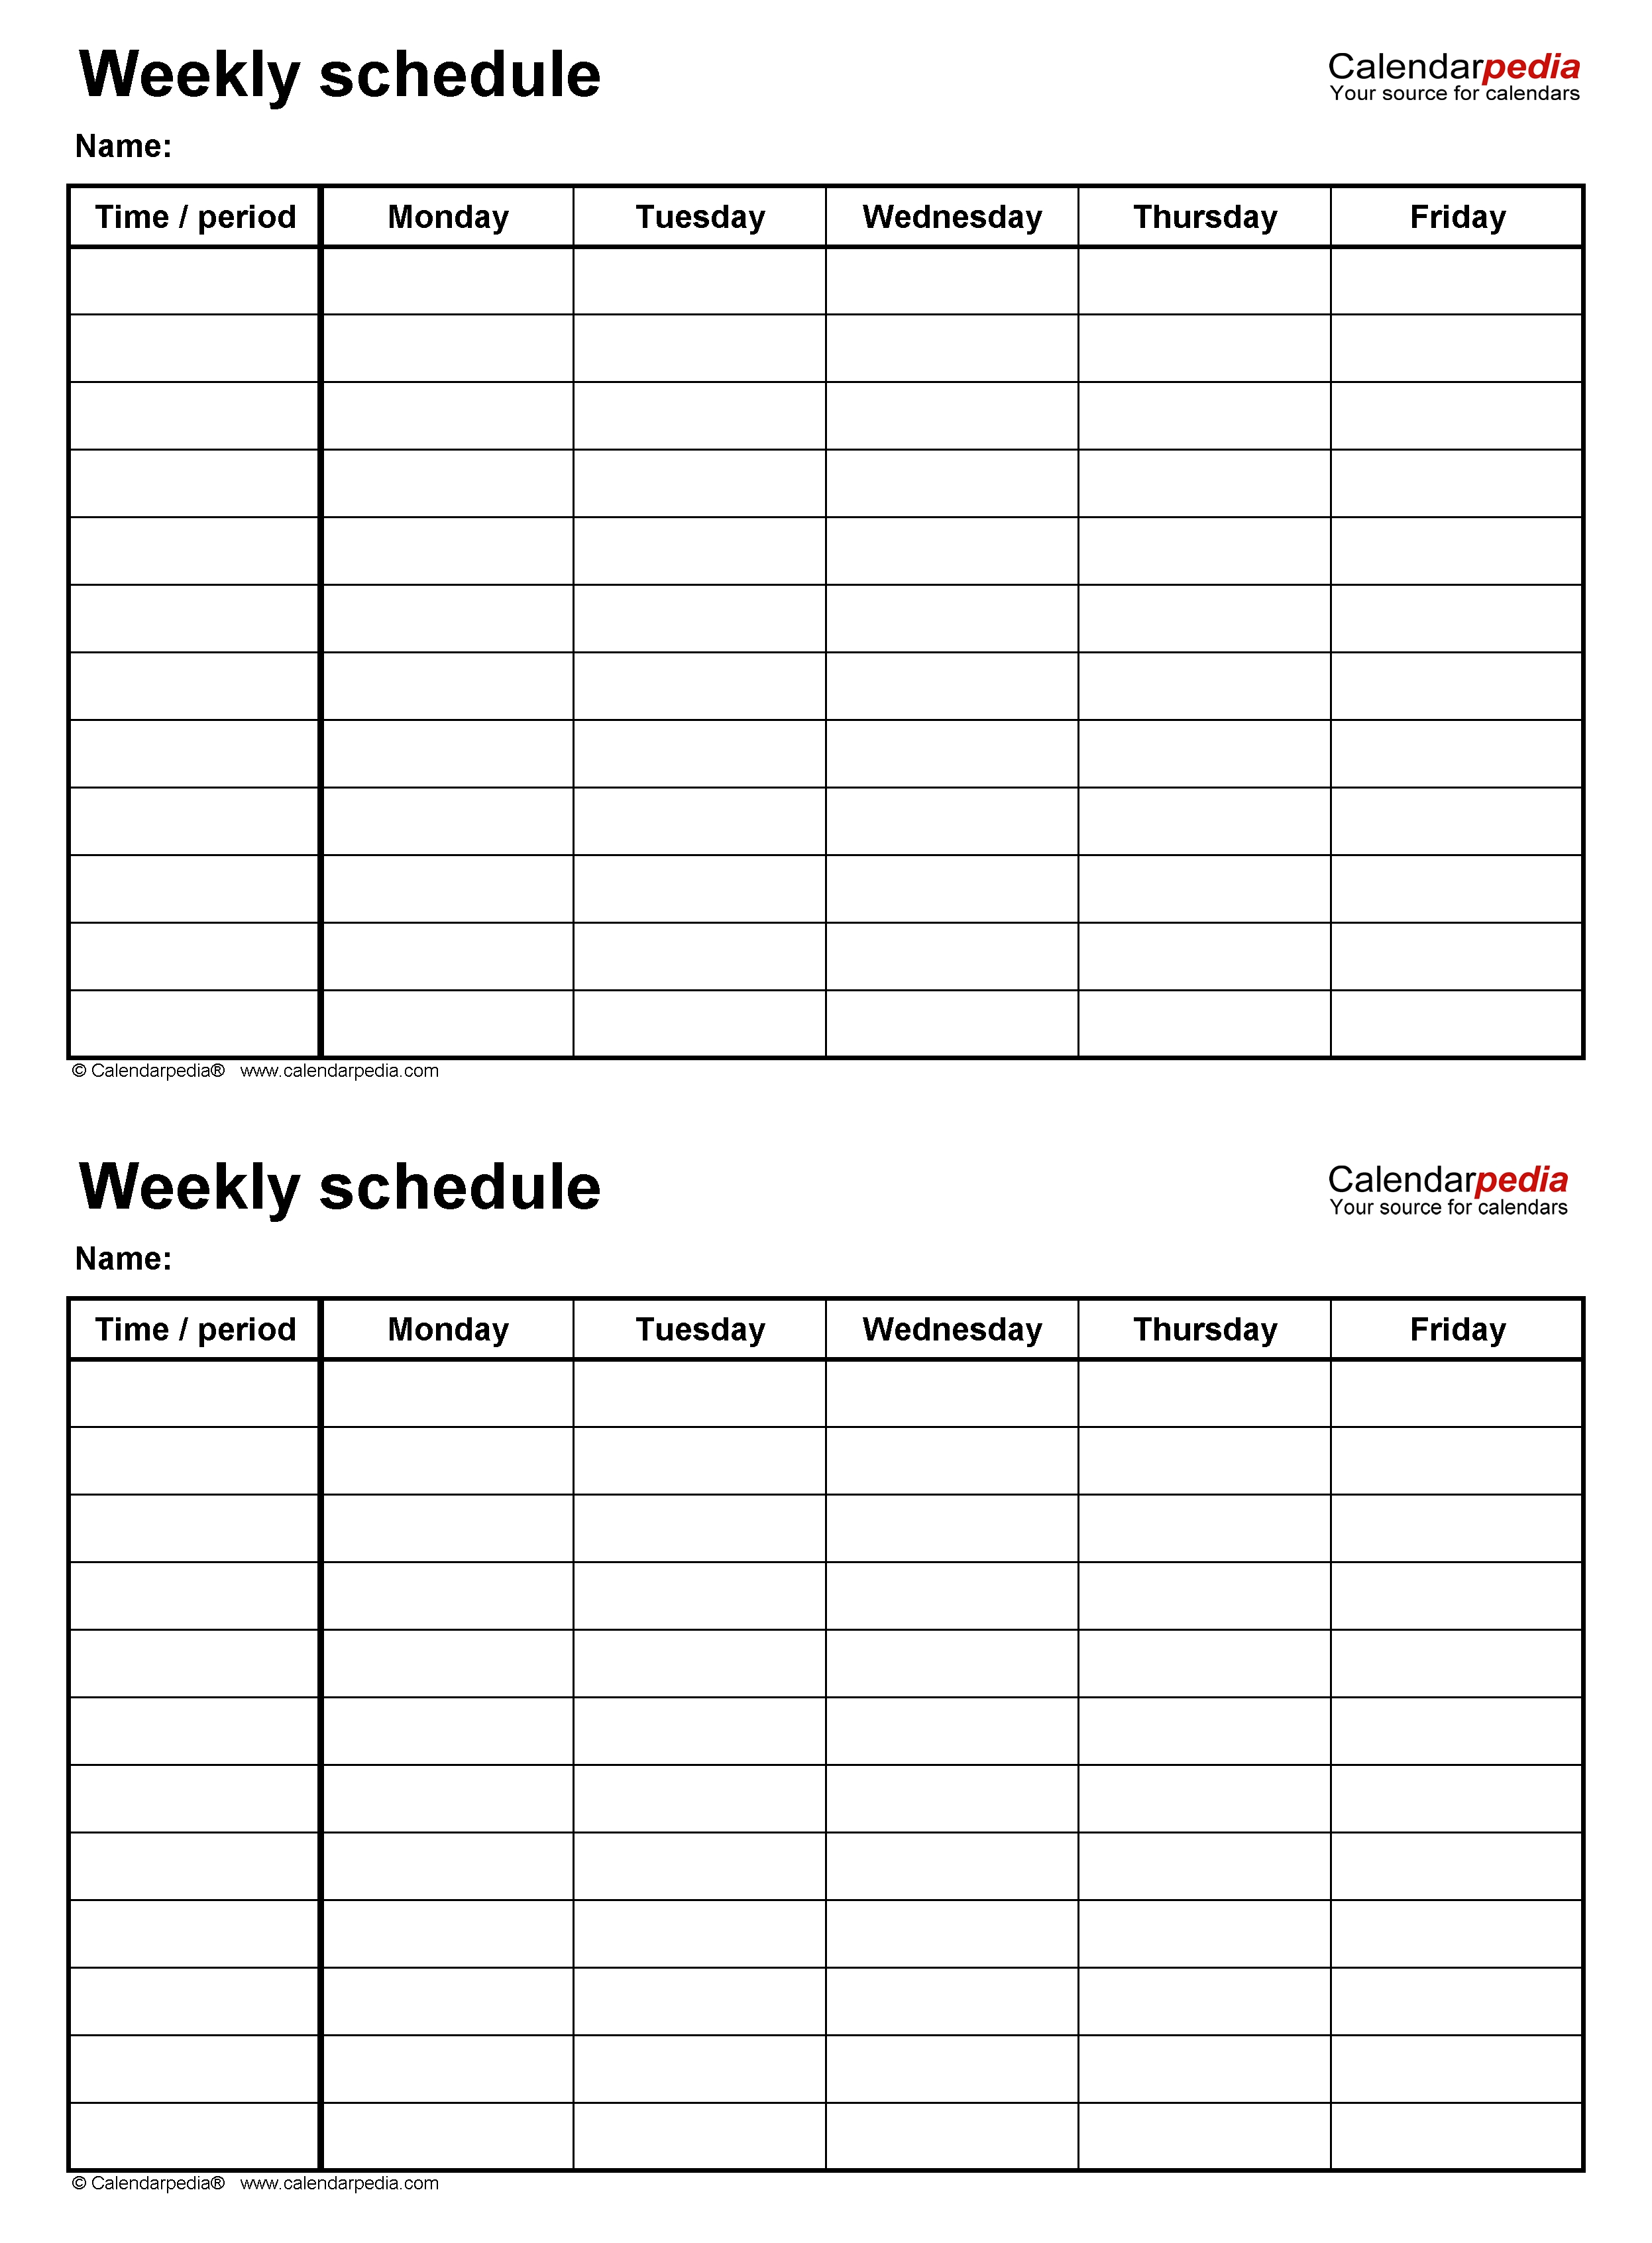 Free Weekly Schedules For Excel - 18 Templates Calendar Template 4 Weeks